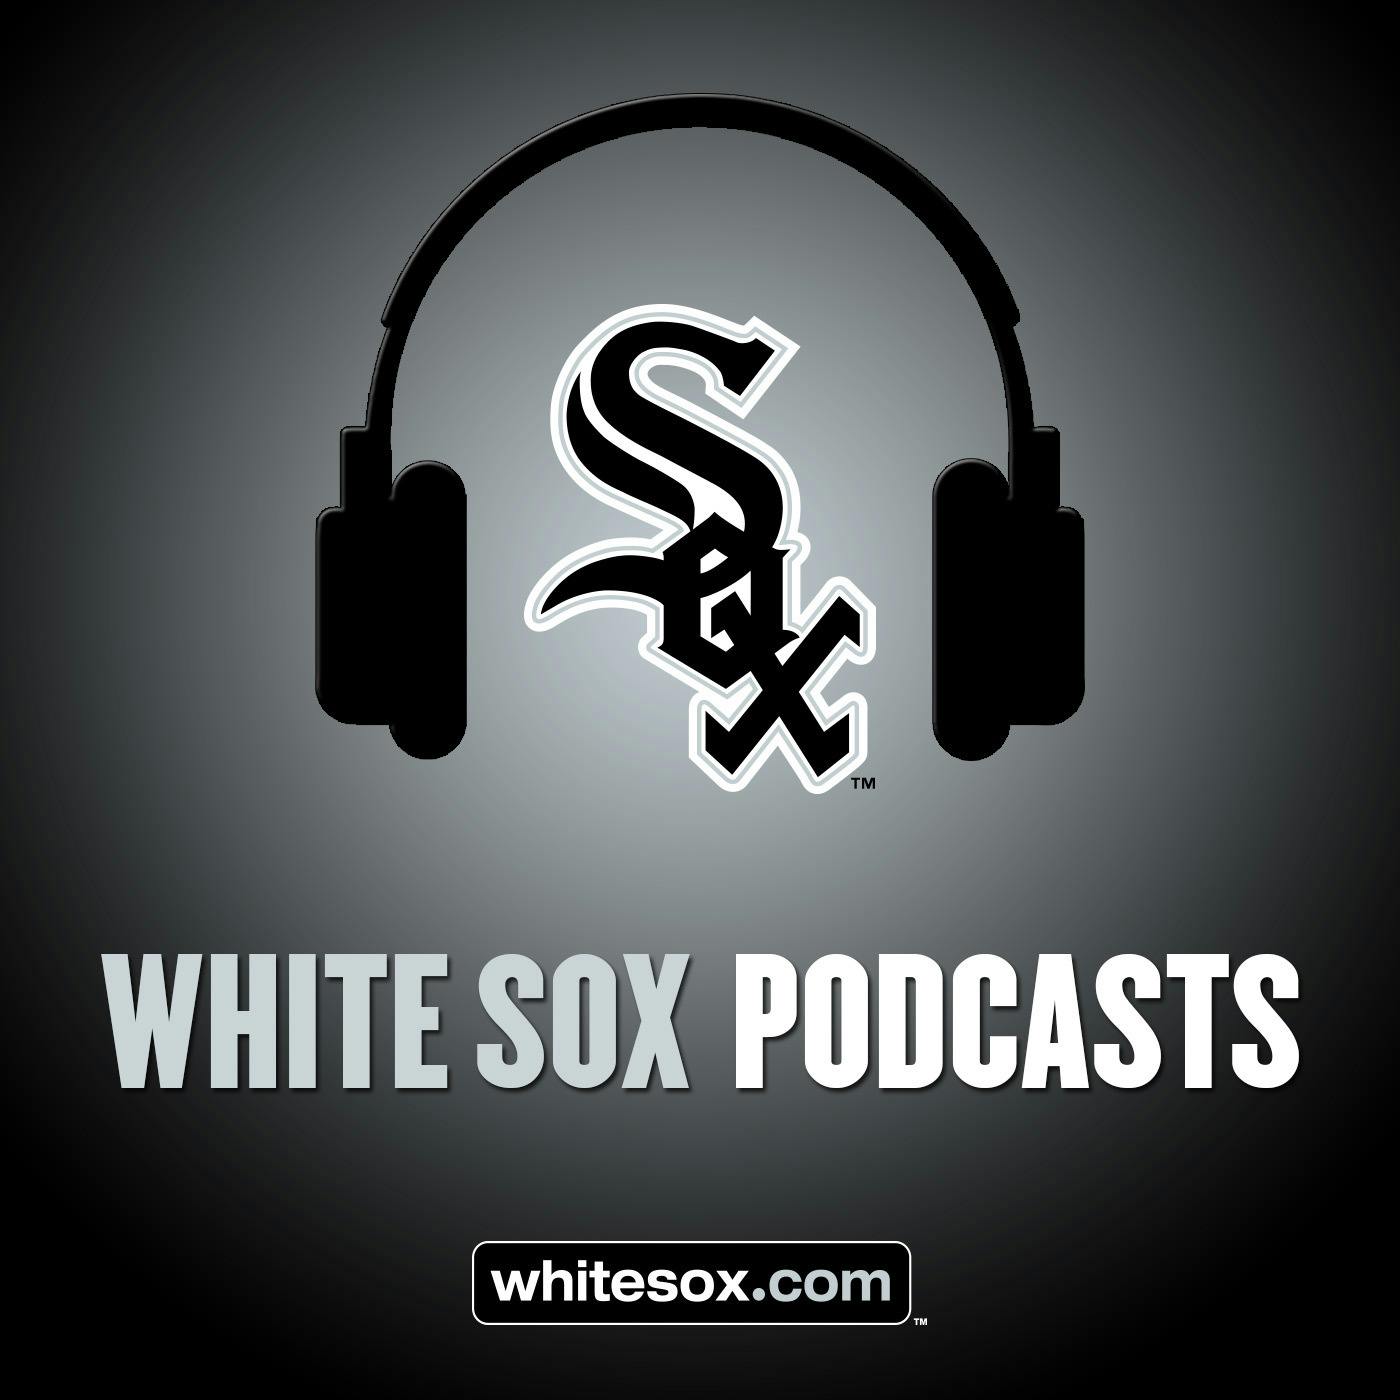 10/13/18: White Sox Weekly